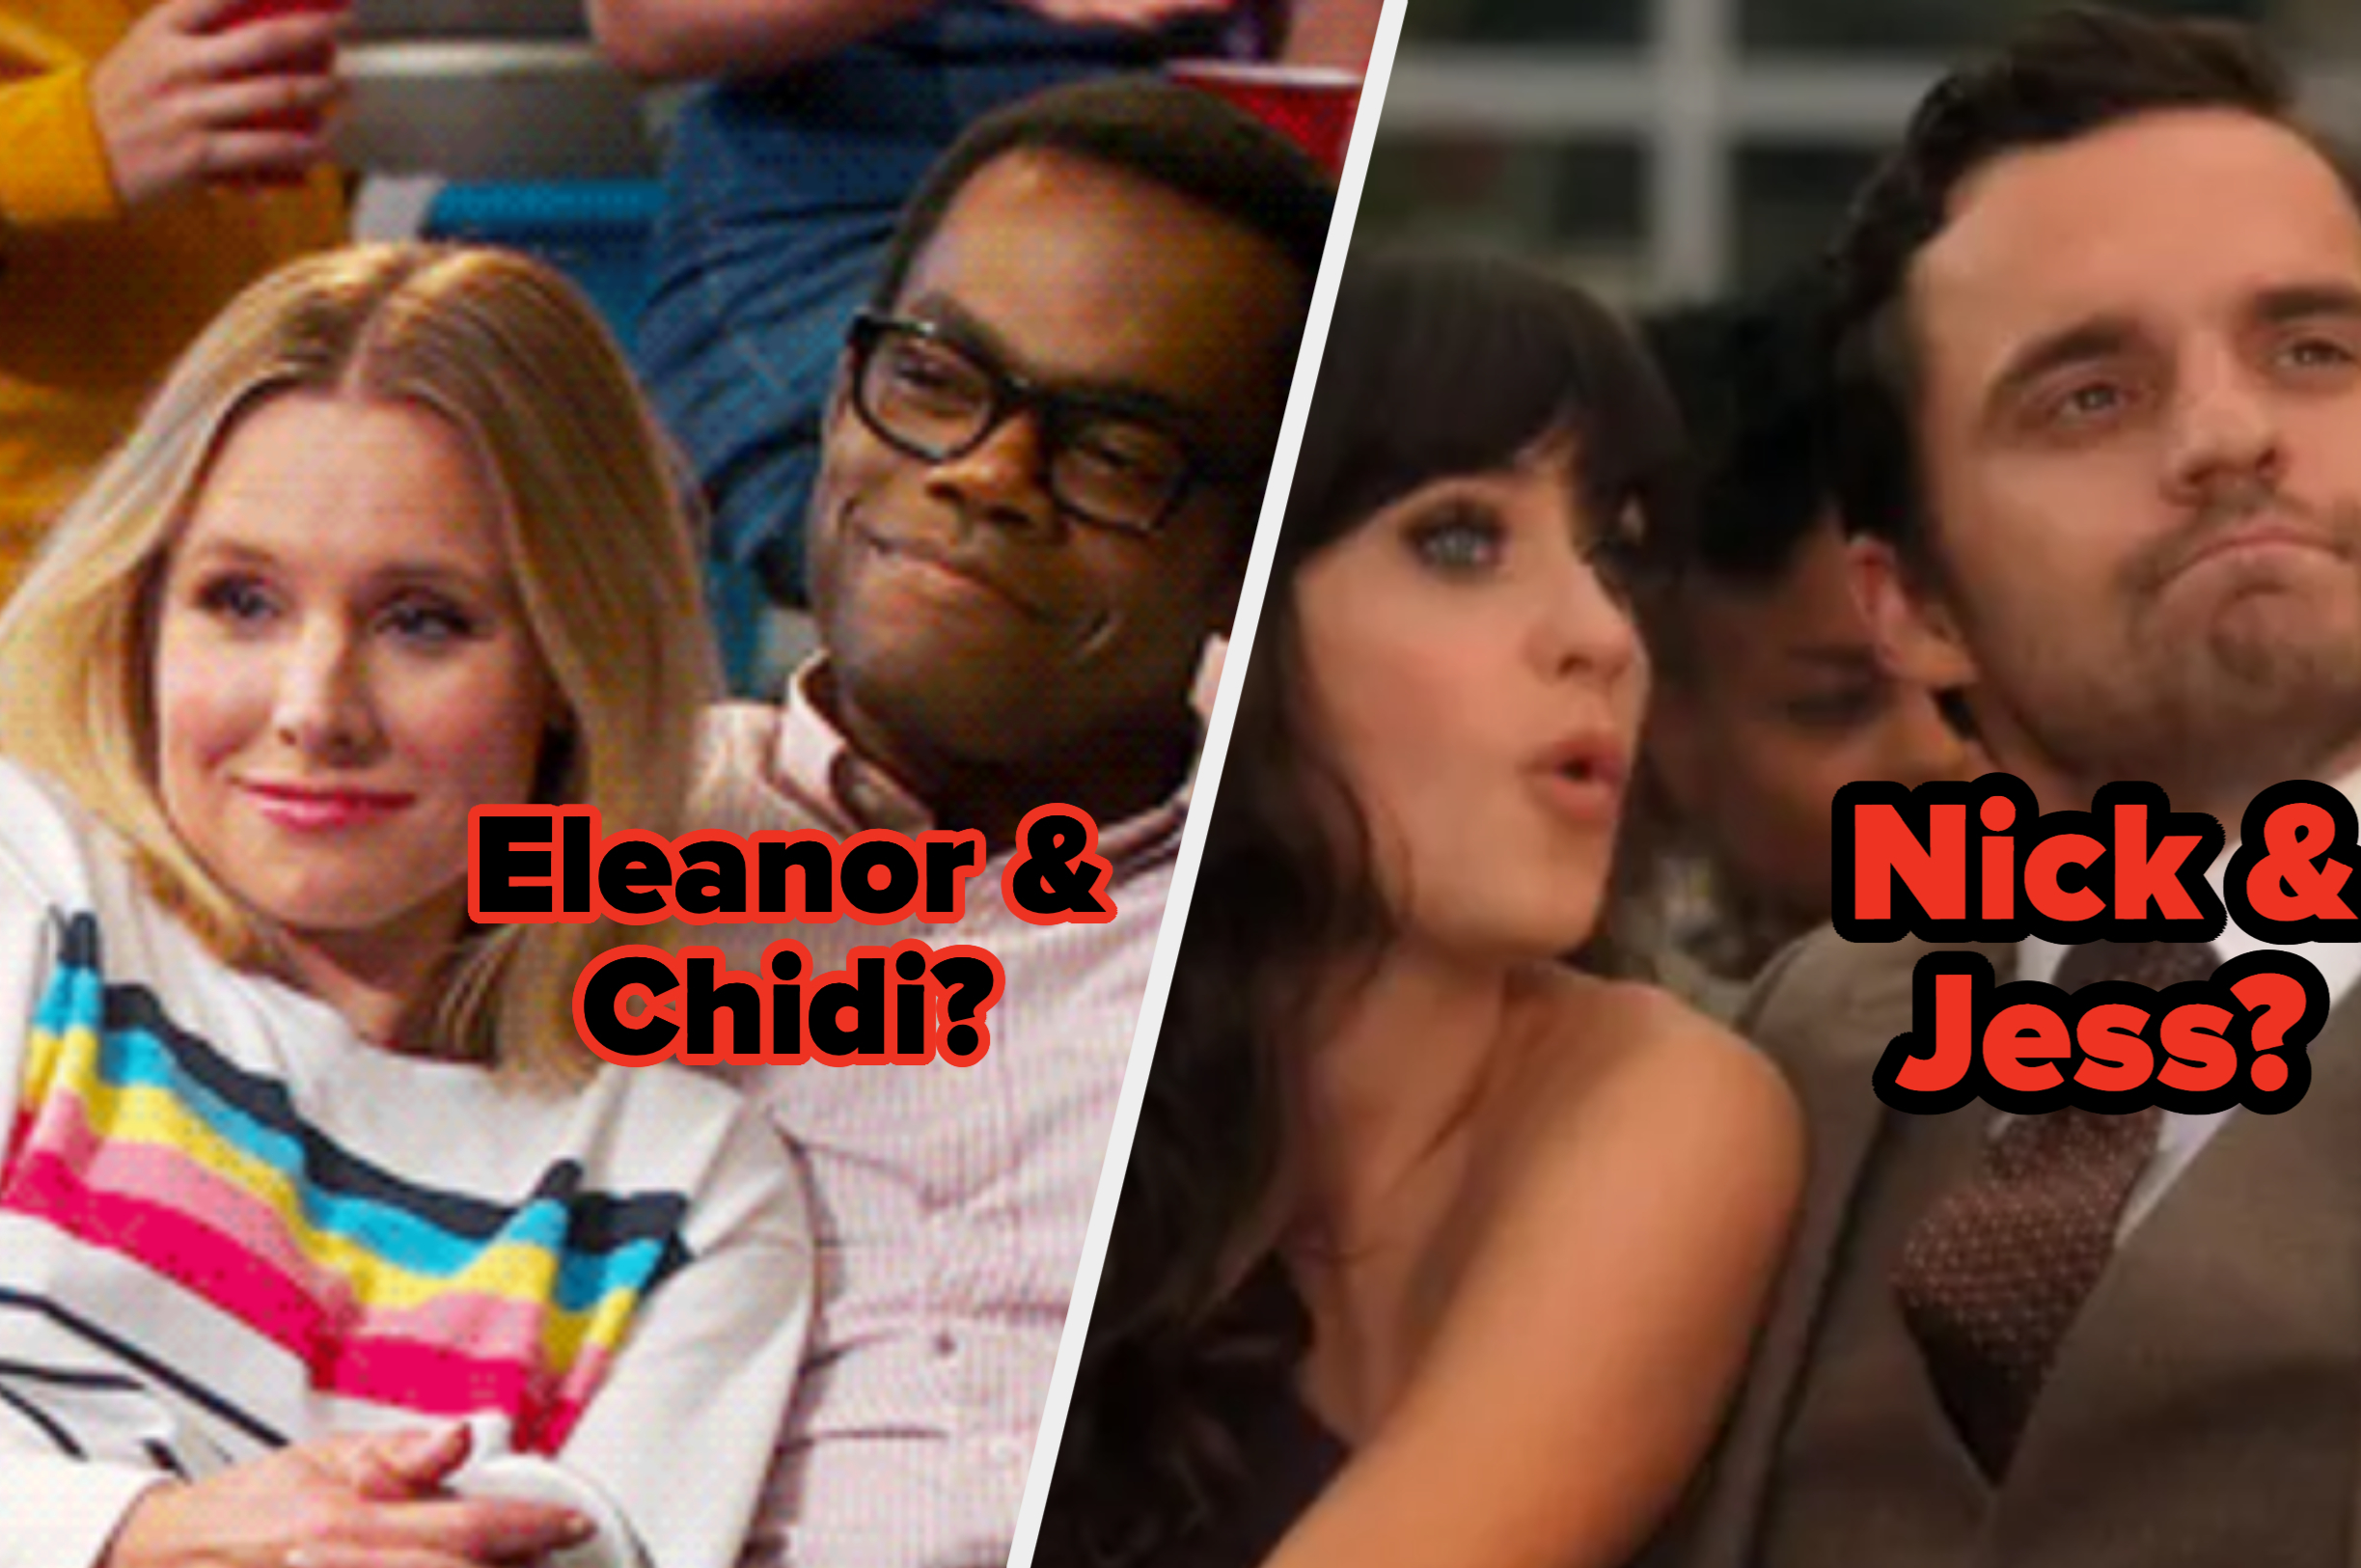 Which Beloved TV Couple Are You And Your Partner?